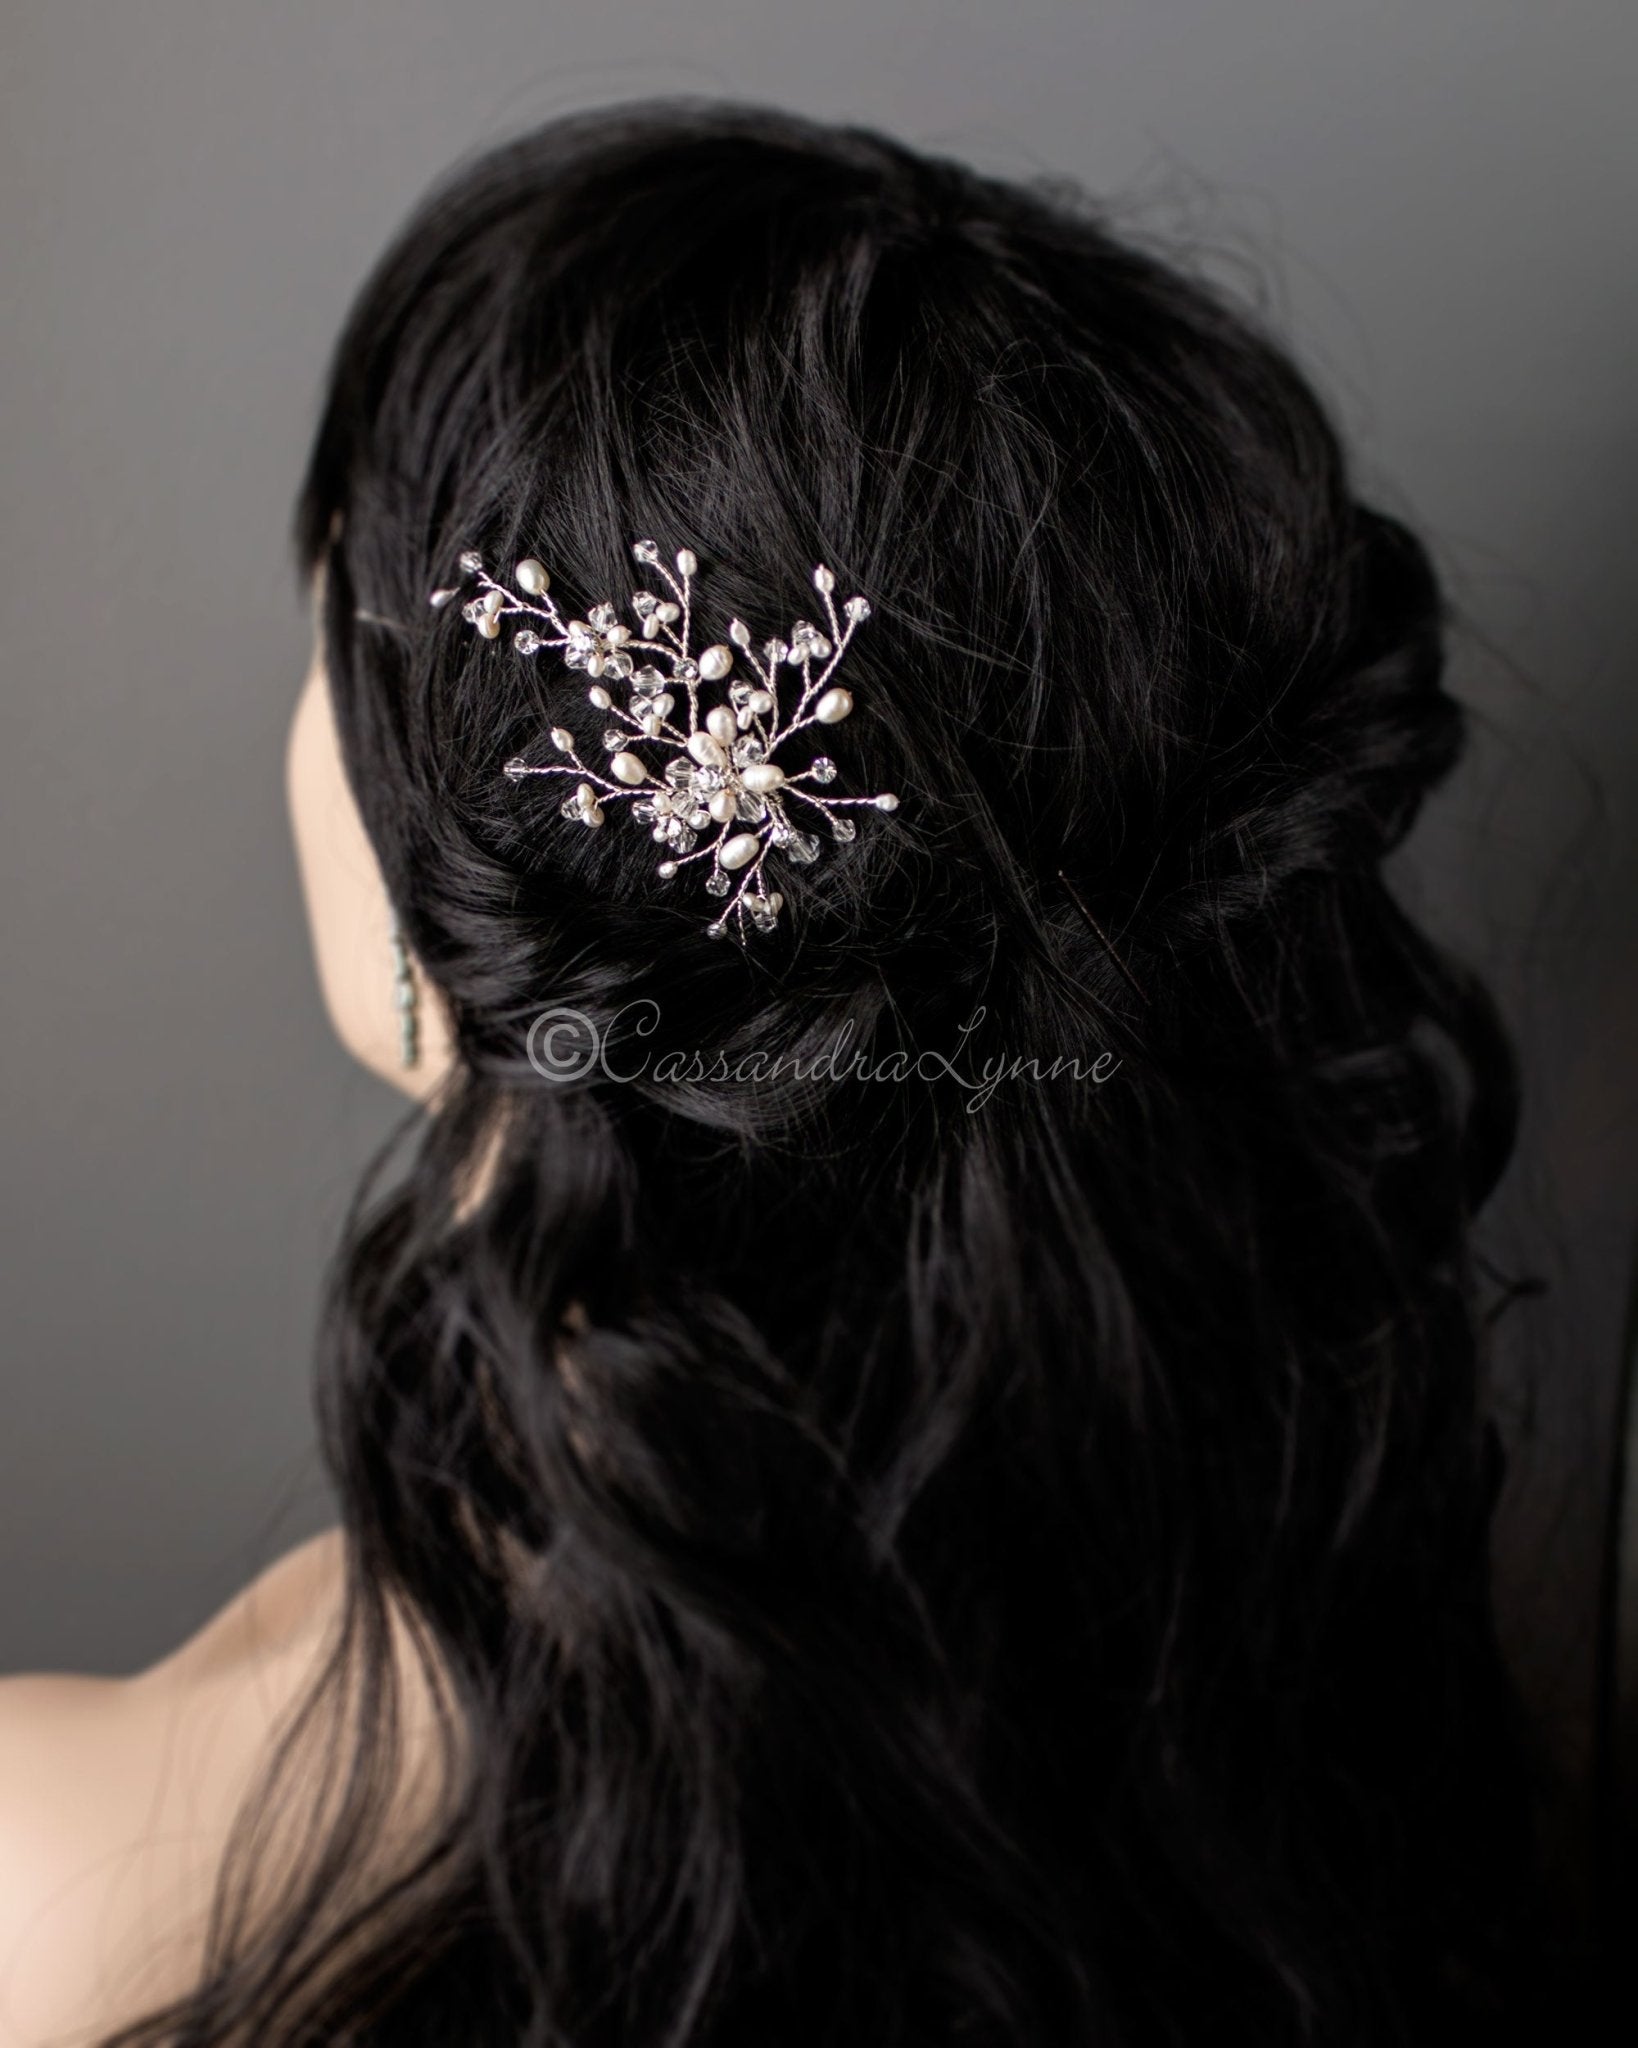 Bridal Hair Pin of Freshwater Pearls and Crystal Beads - Cassandra Lynne